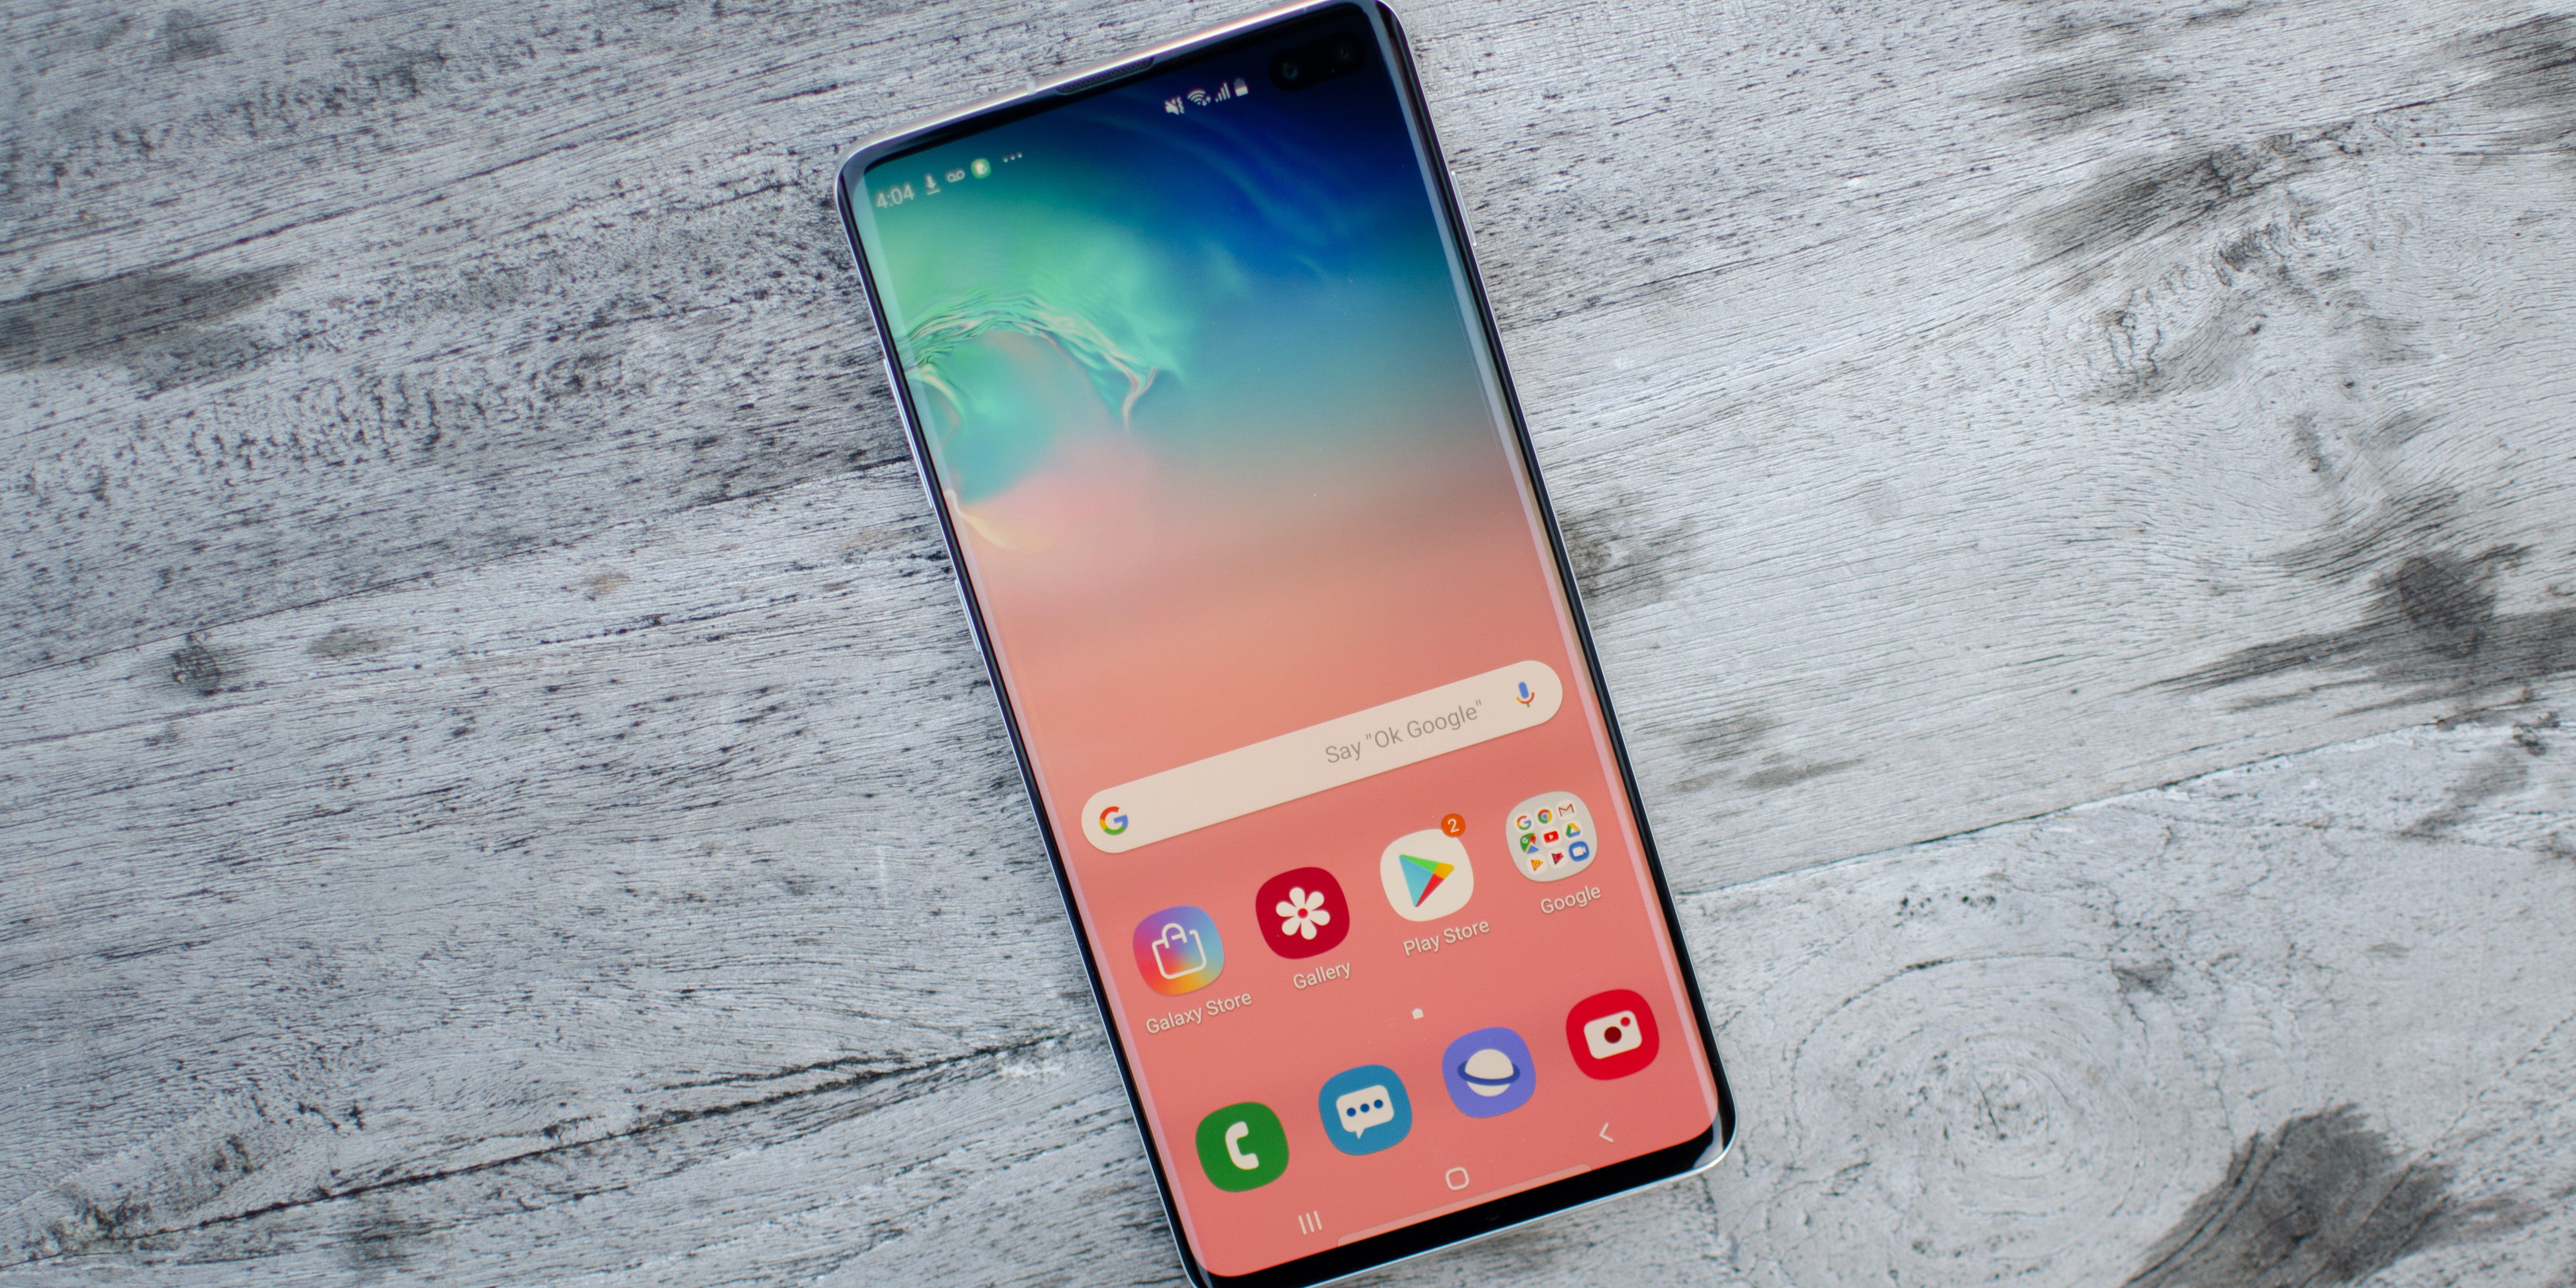 Samsung has provided Android 10 beta for Galaxy S10 users